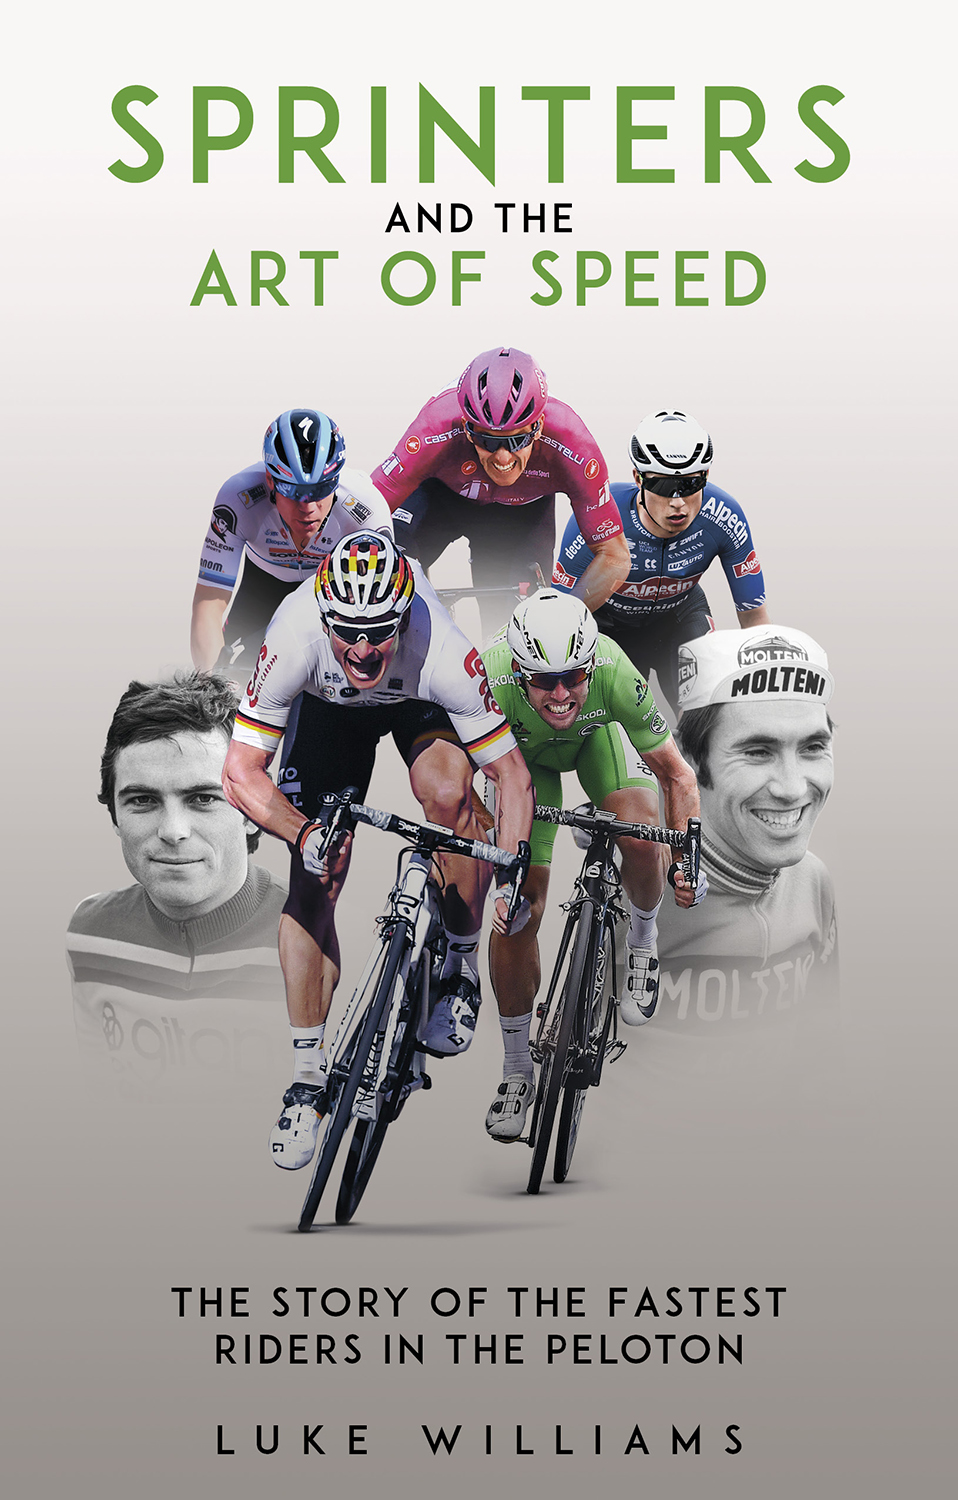 Sprinters and the Art of Speed